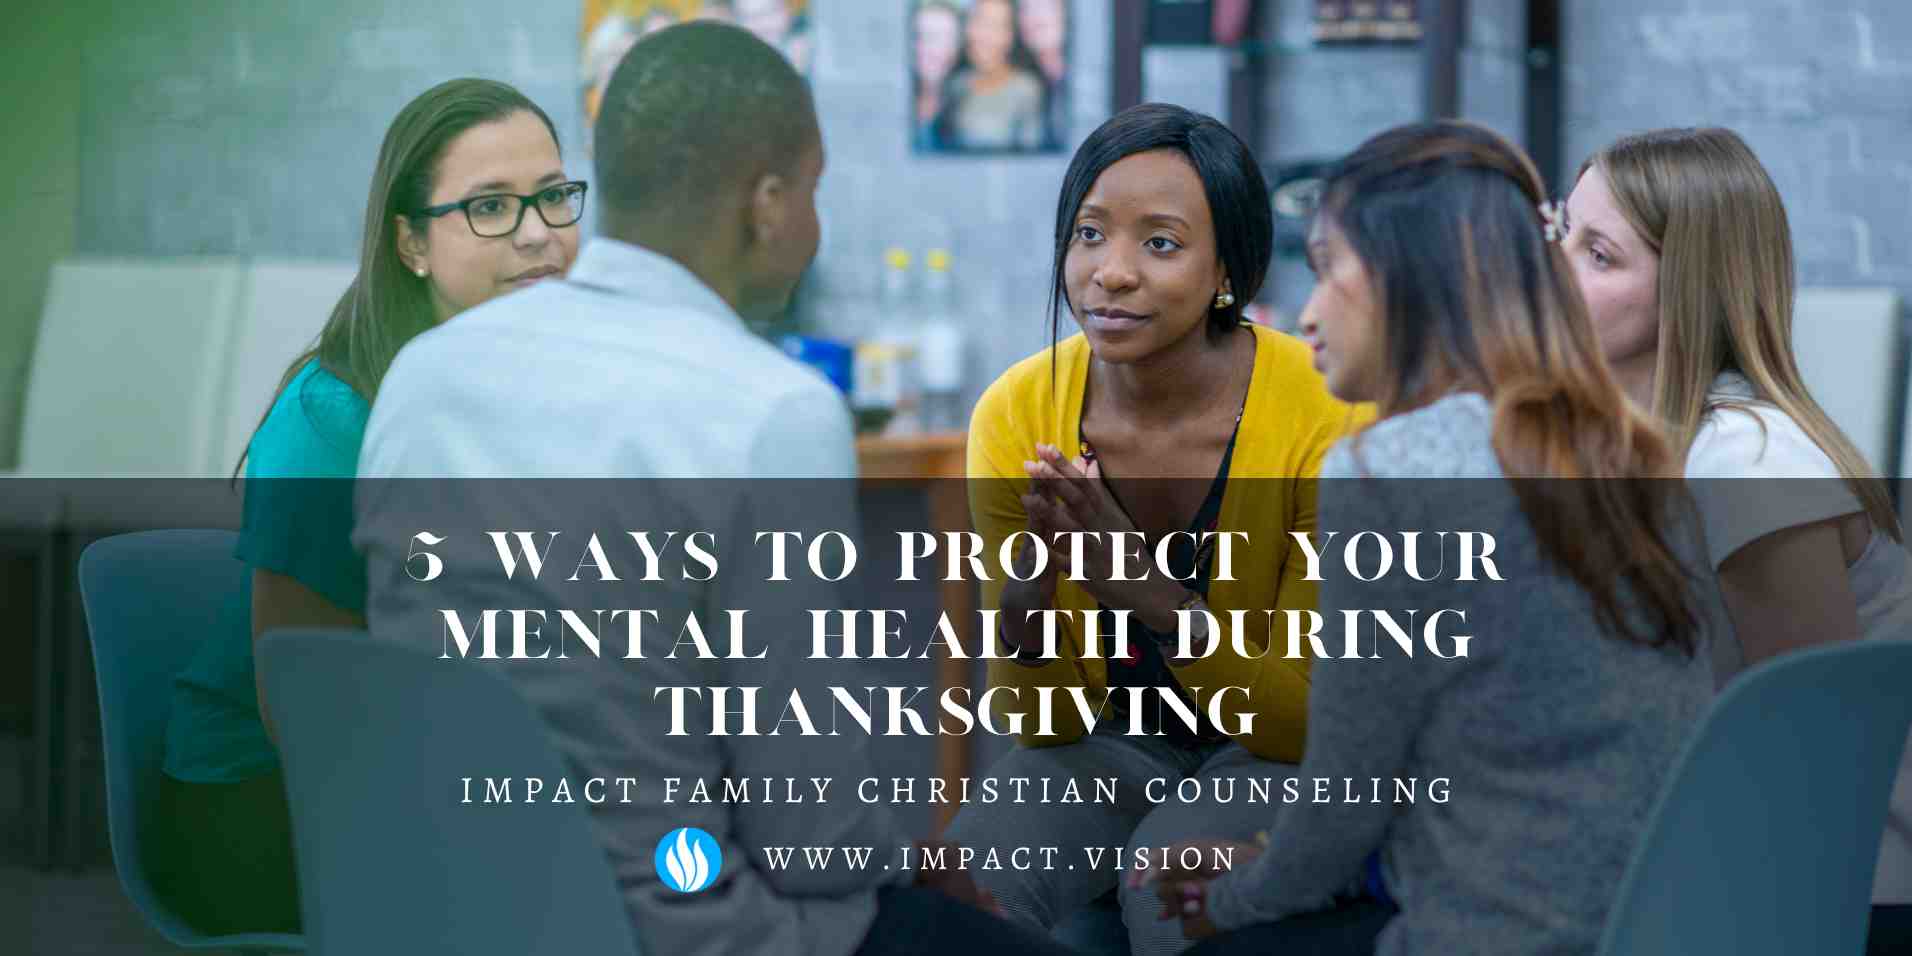 5 Ways to Protect Your Mental Health During Thanksgiving